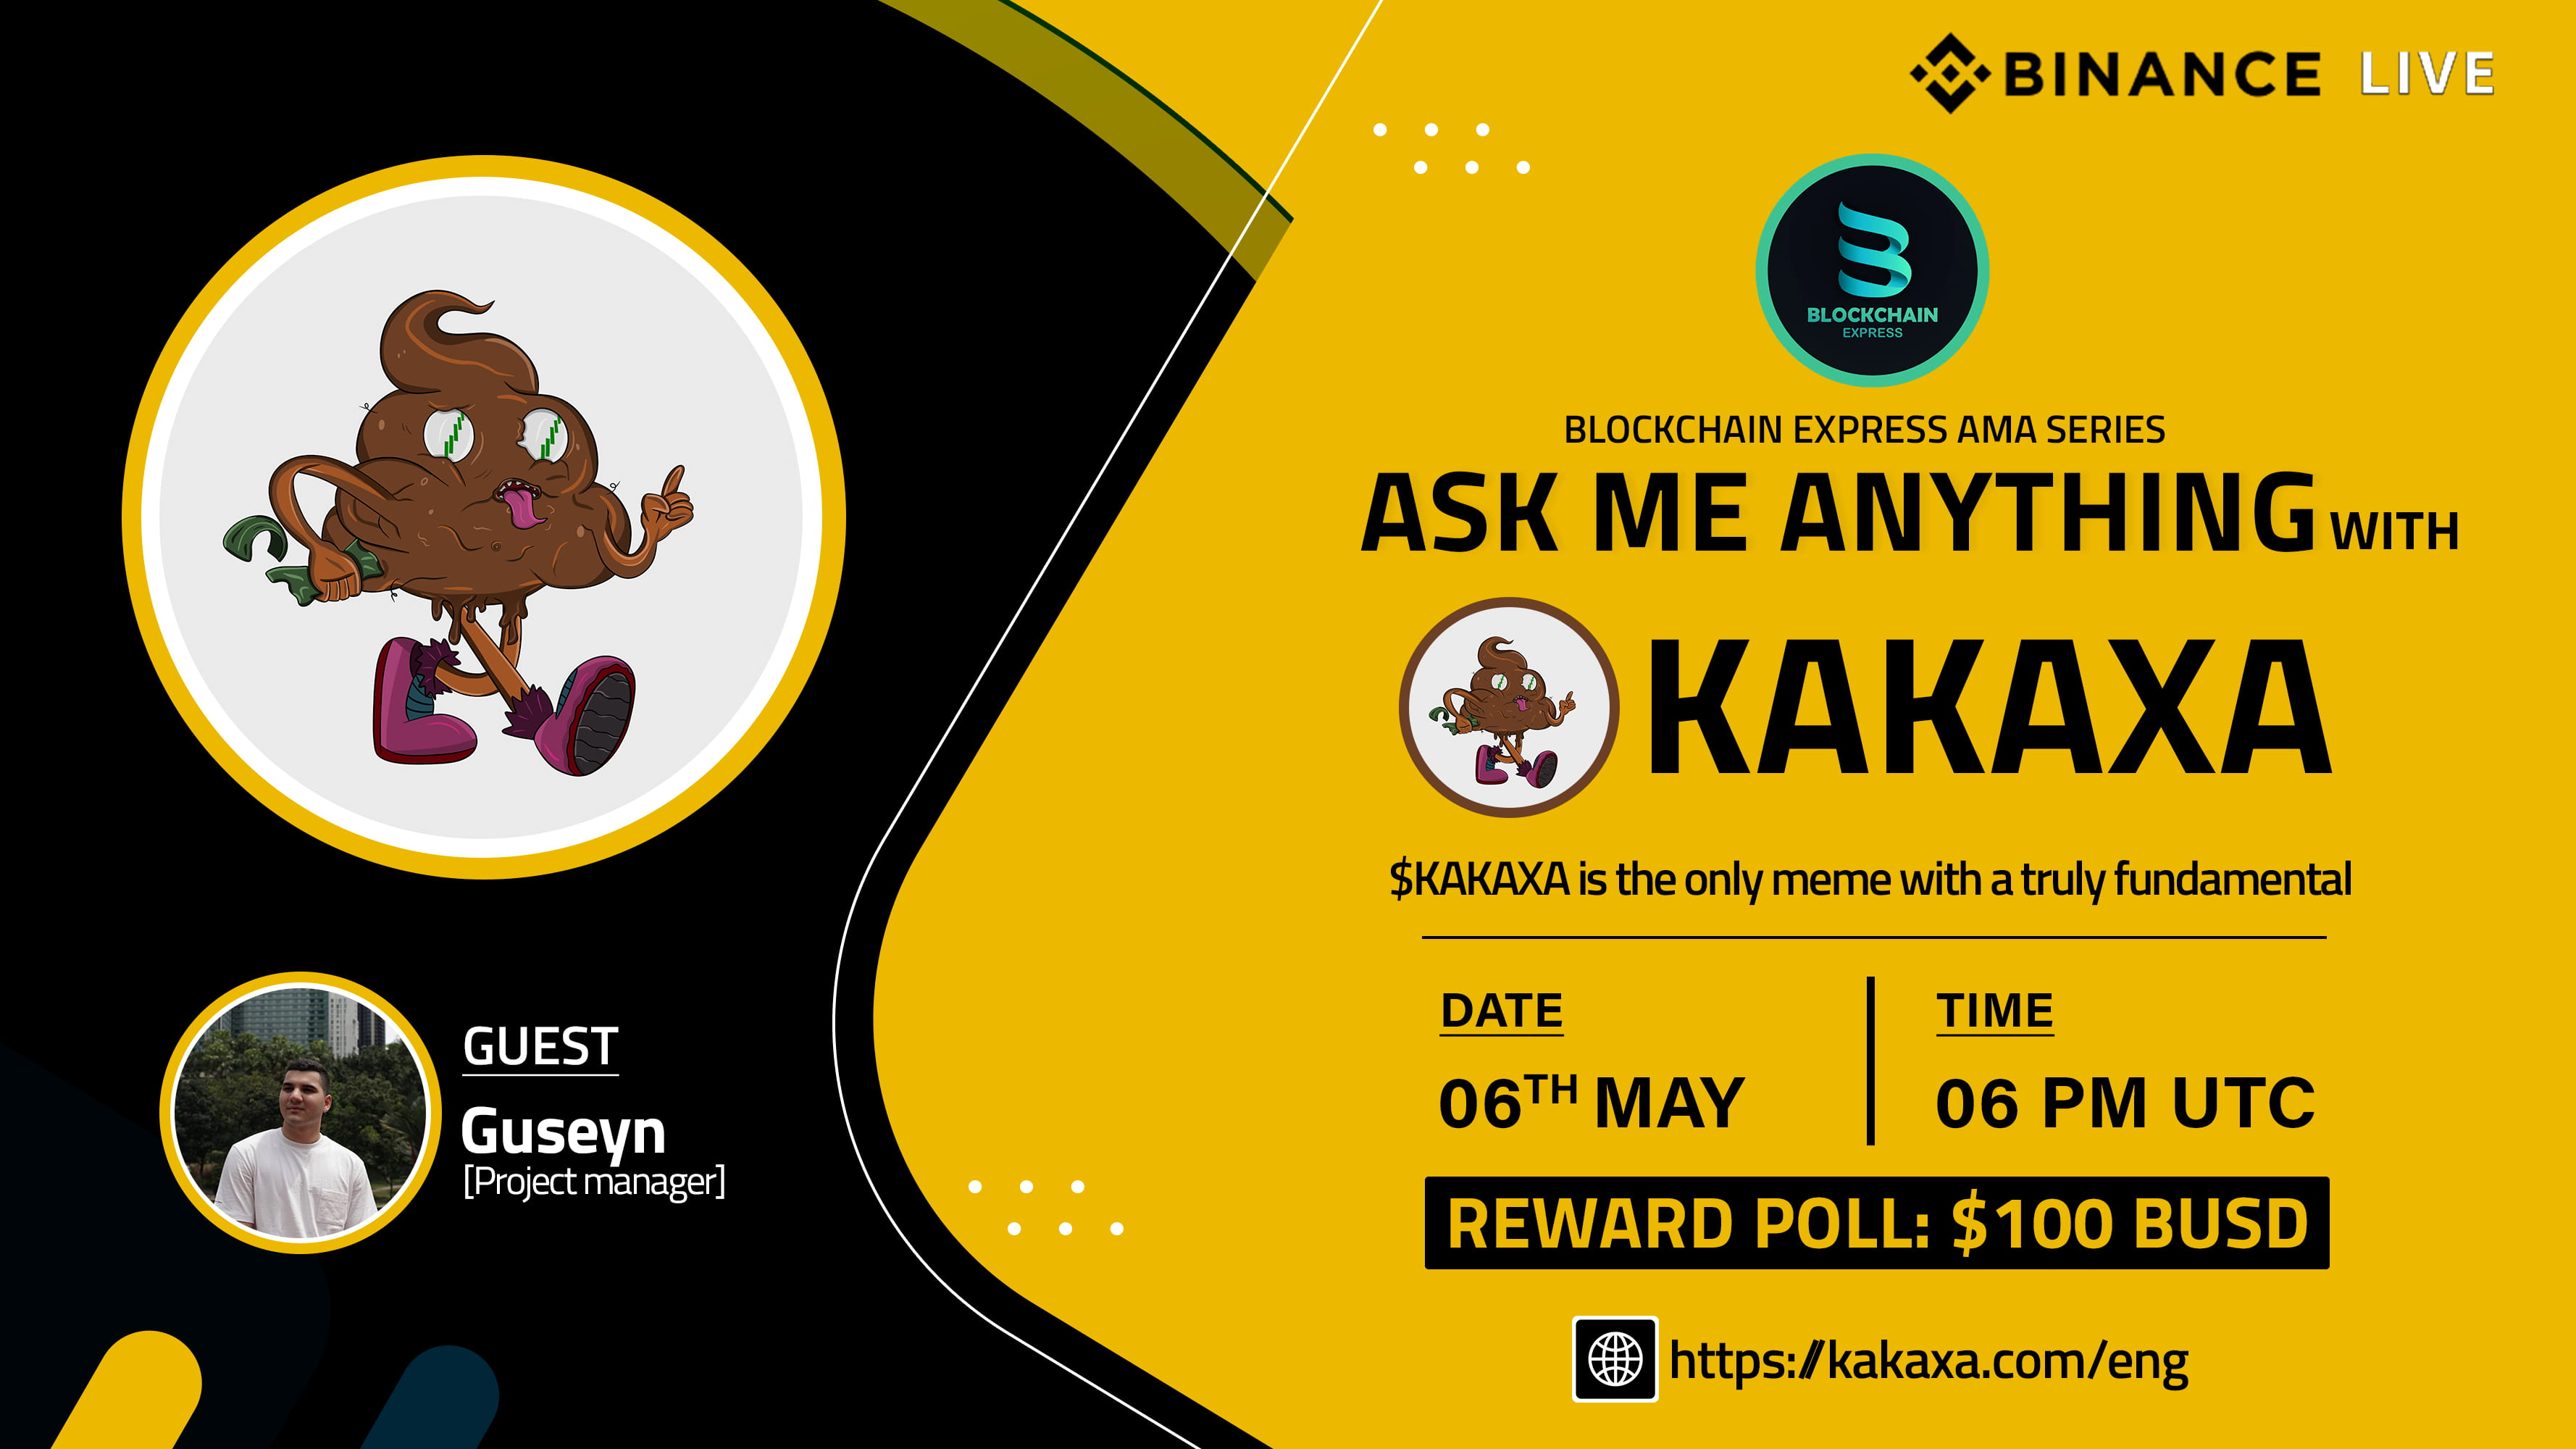 ₿lockchain Express will be hosting an AMA session with" Kakaxa "